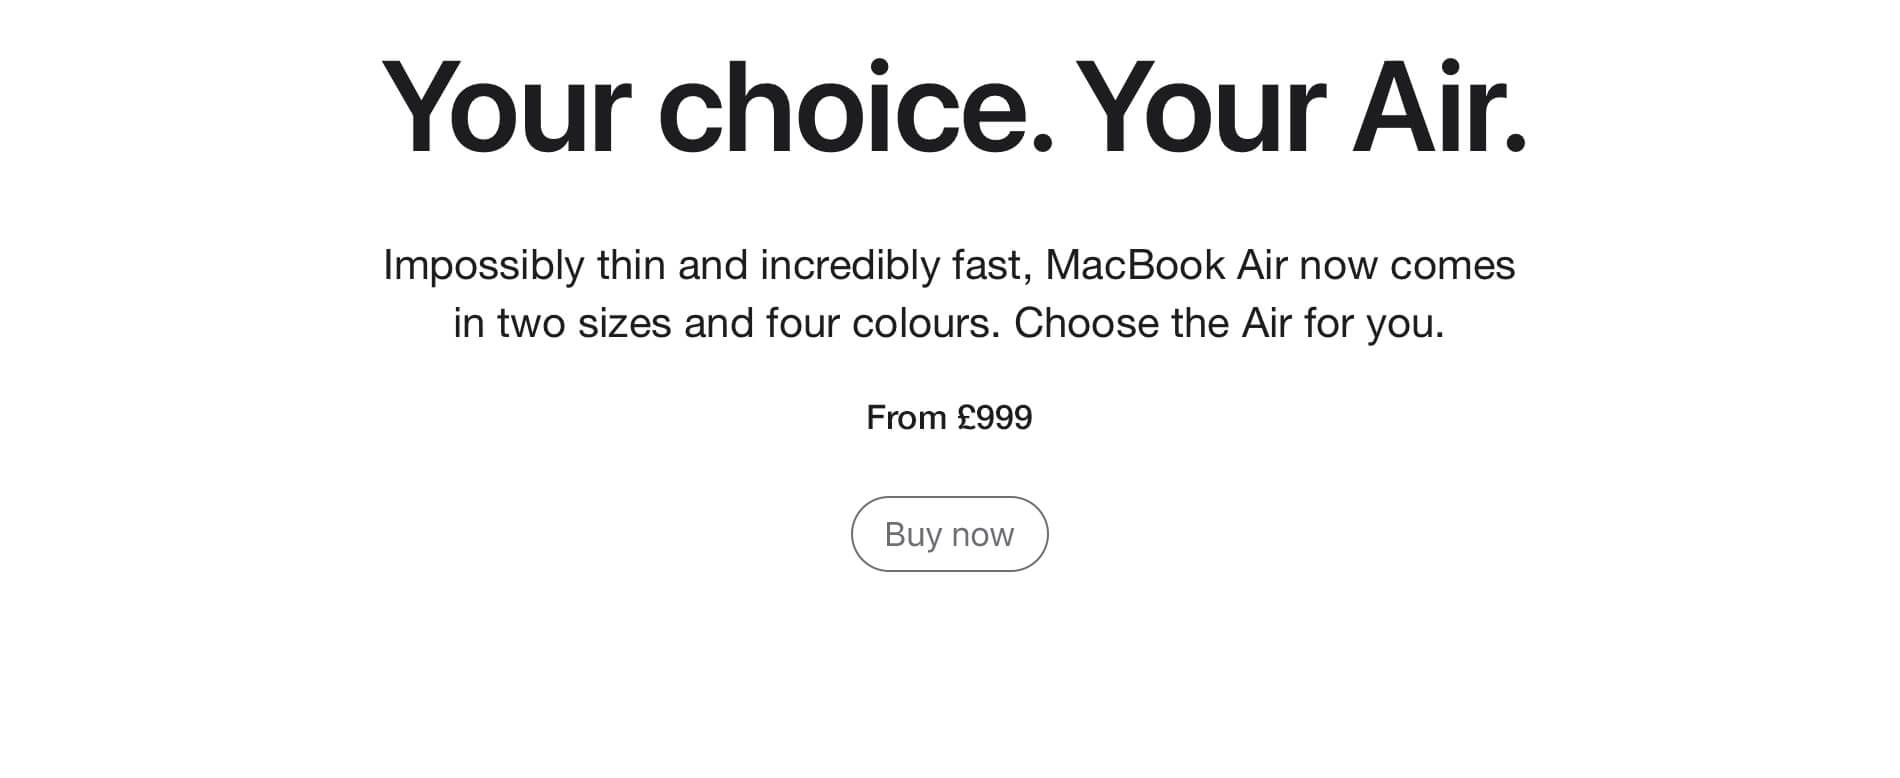 Your choice. Your Air